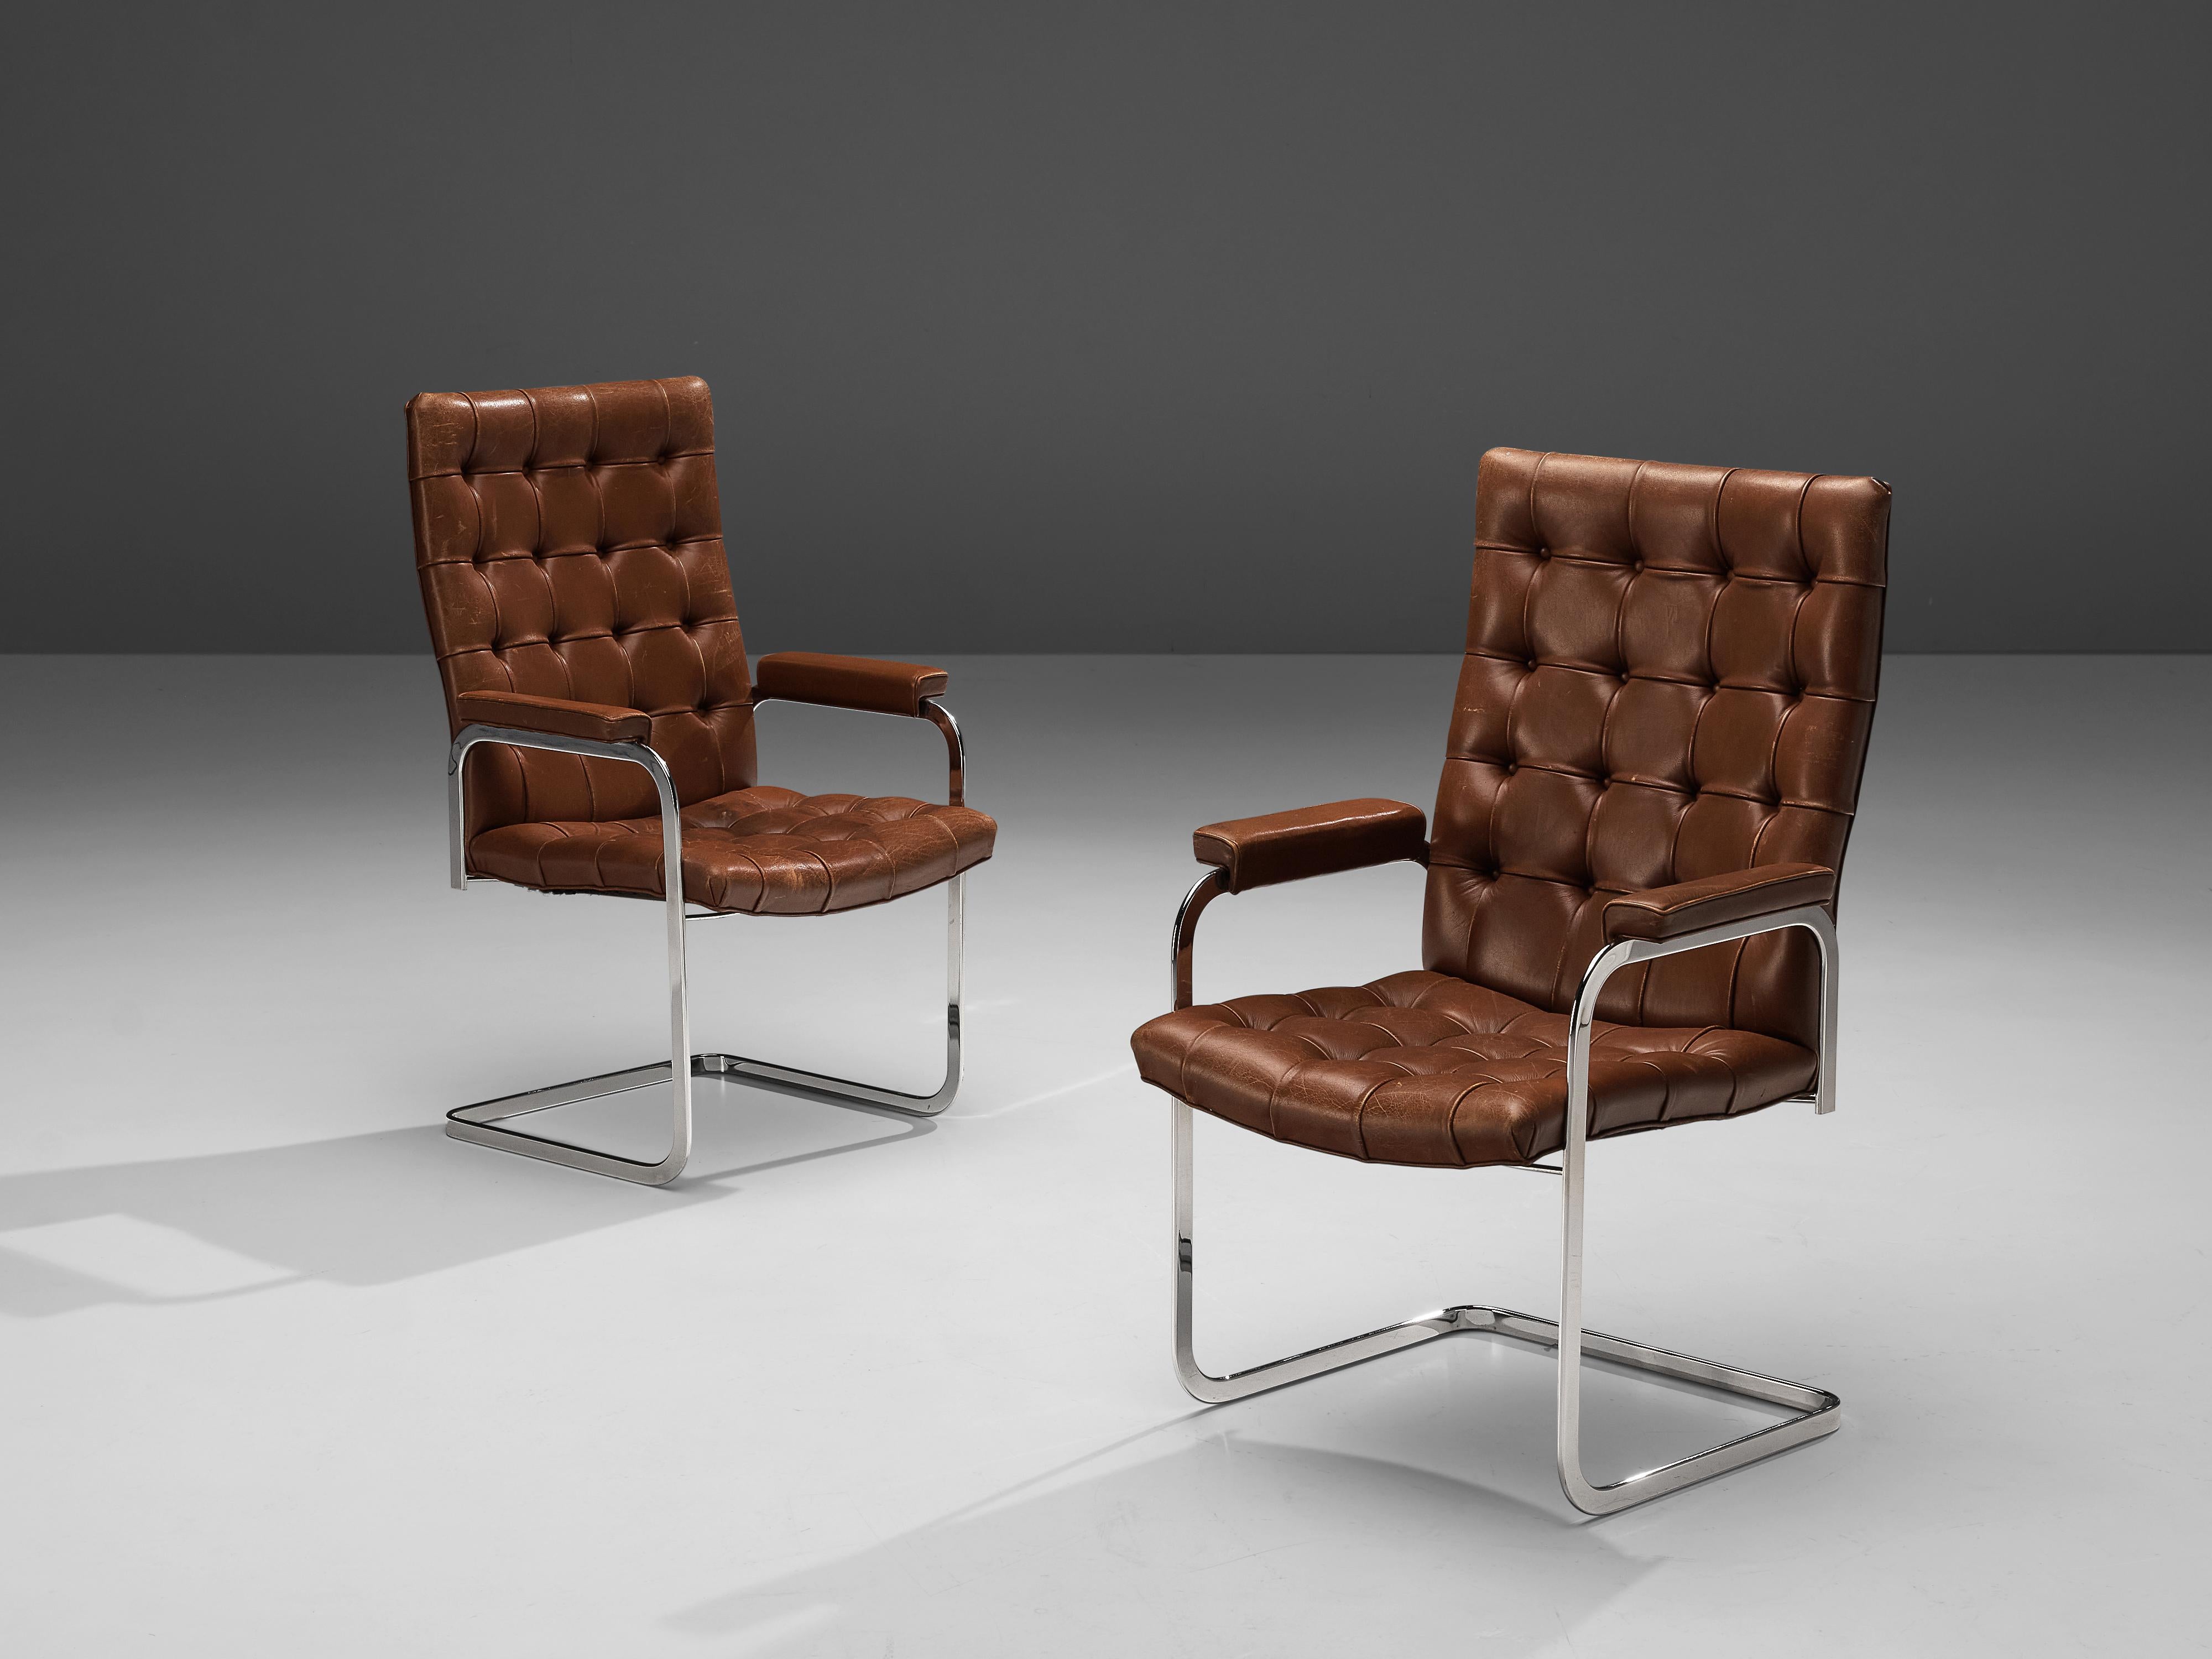 Robert Haussmann and De Sede, 'RH-304', brown leather, steel, Switzerland, 1950s

This cantilever tufted armchairs is designed by Robert Haussmann for DeSede. The set has a business aesthetic combined with a comfortable seat and back. This set